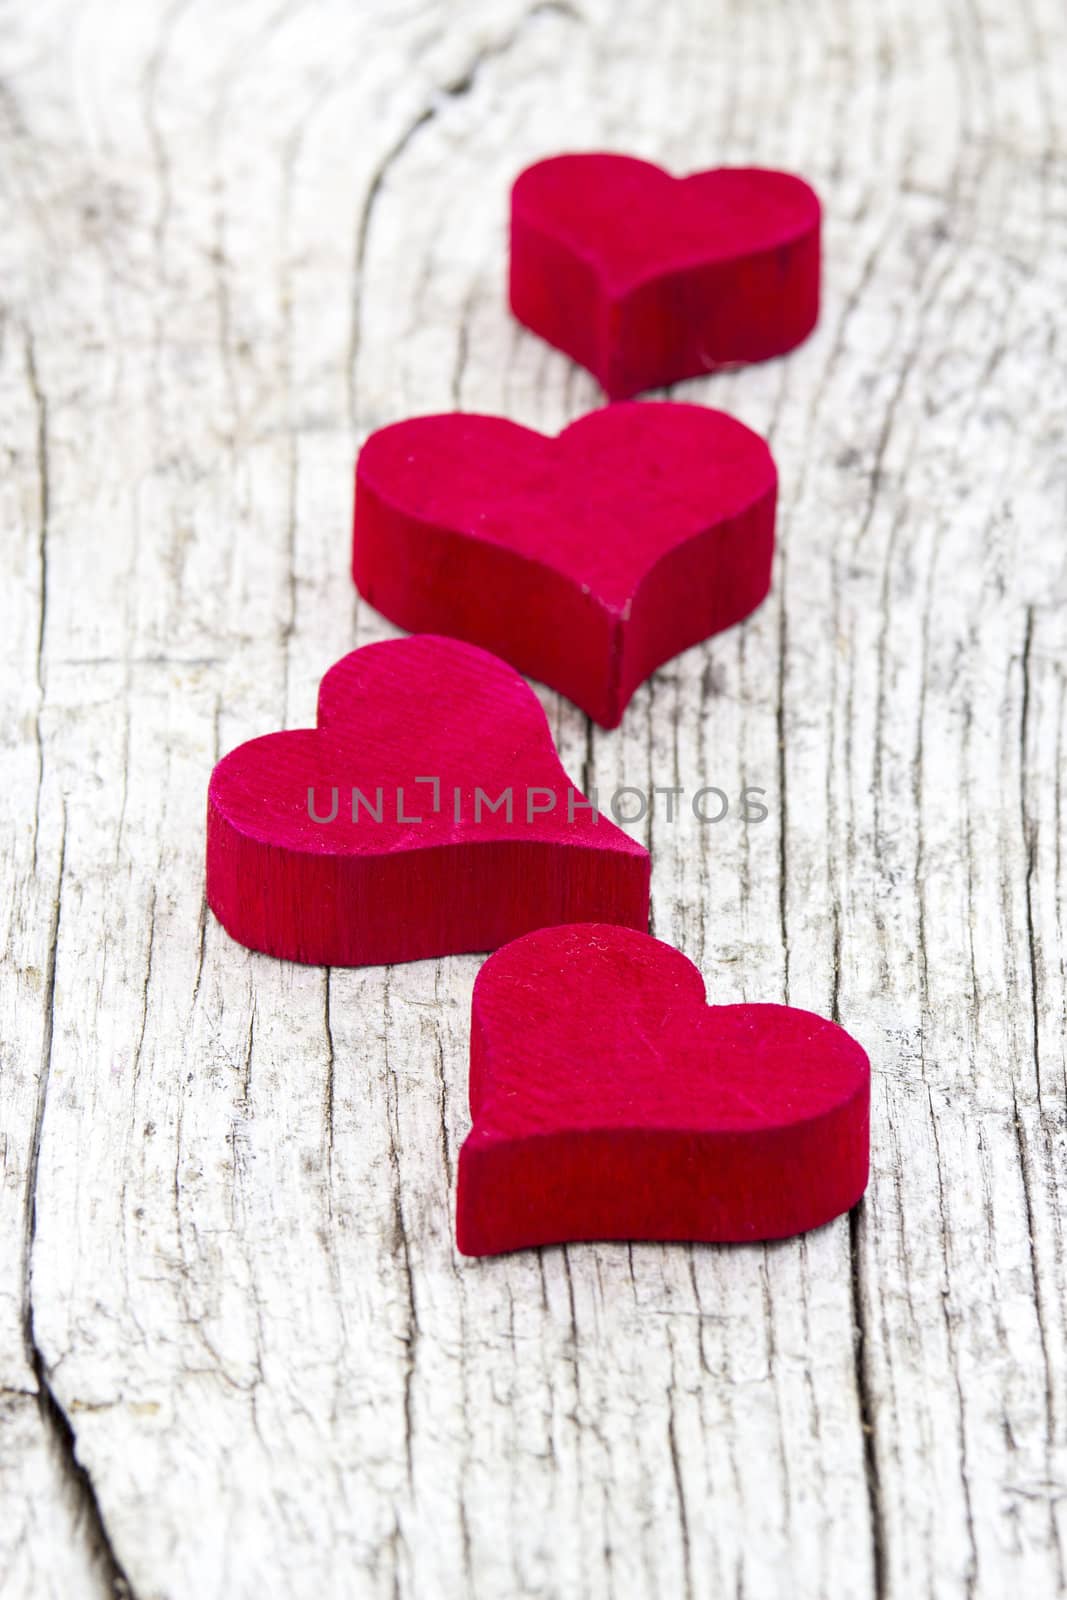 red hearts on old wooden background